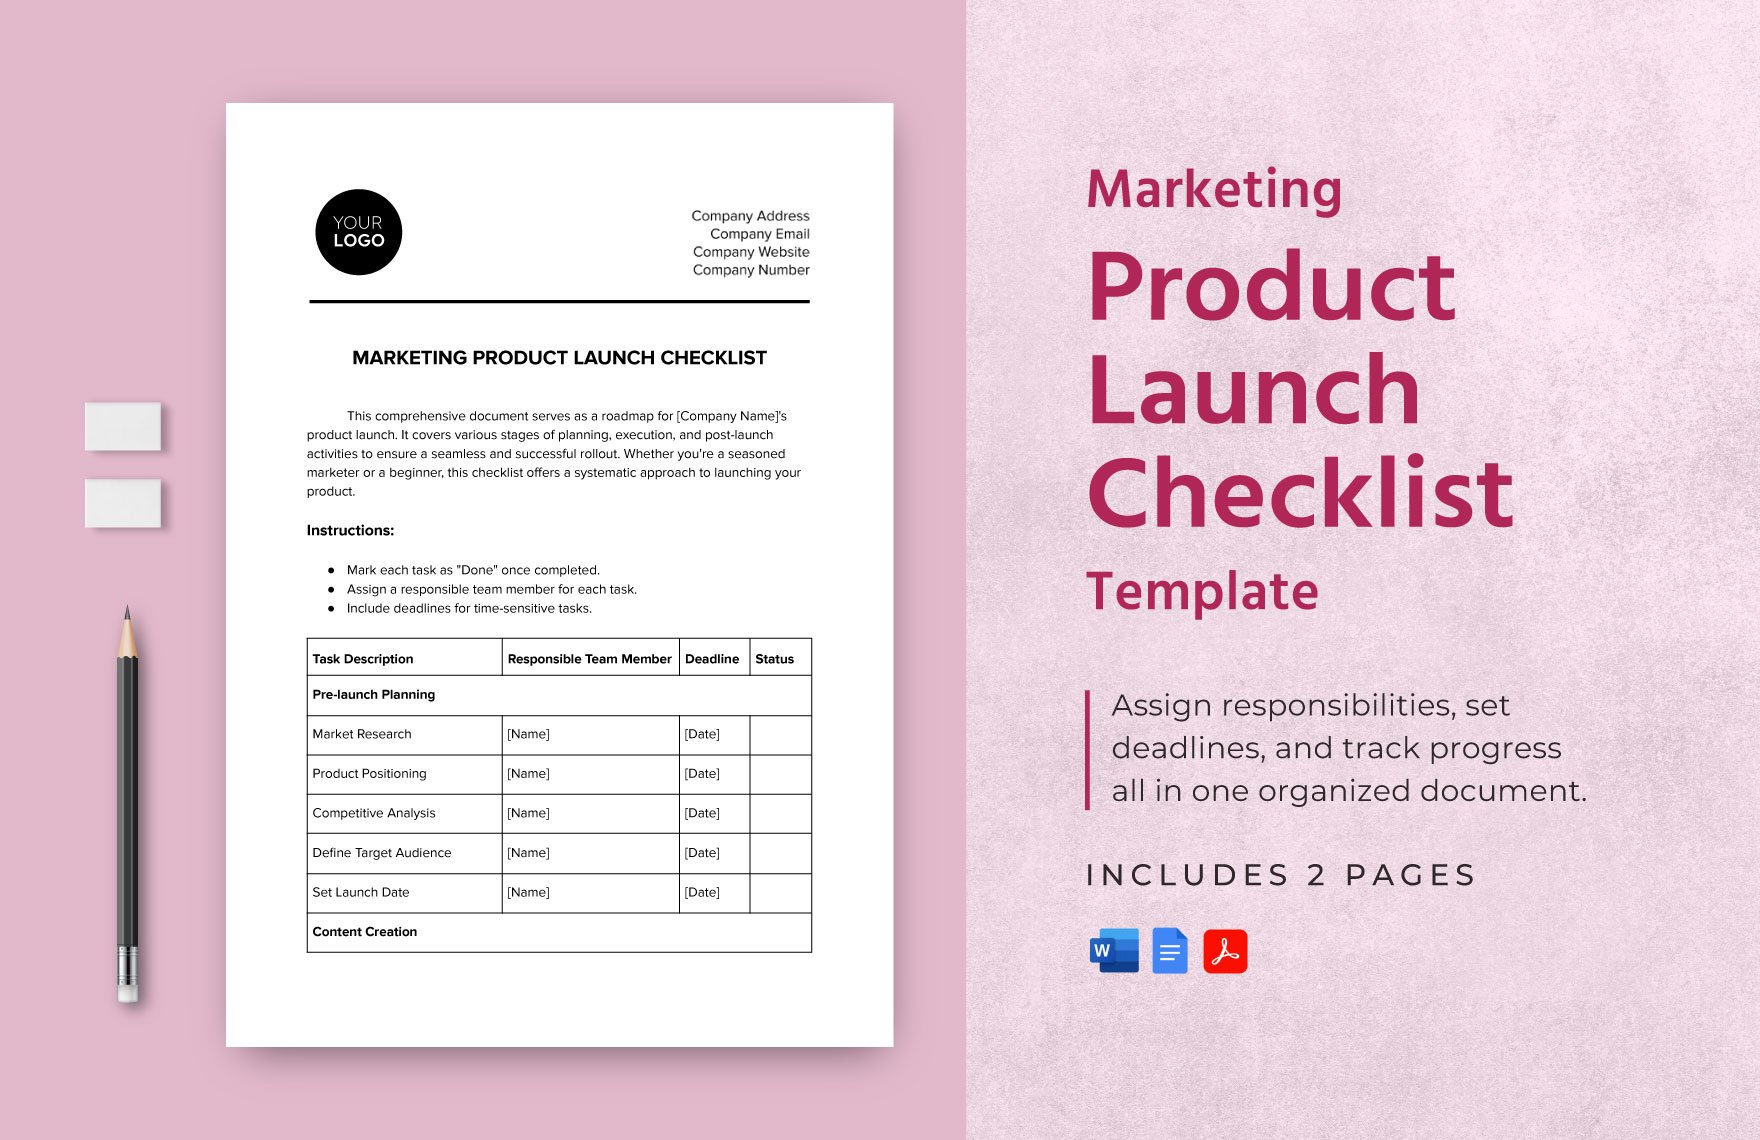 Marketing Product Launch Checklist Template in Word, Google Docs, PDF